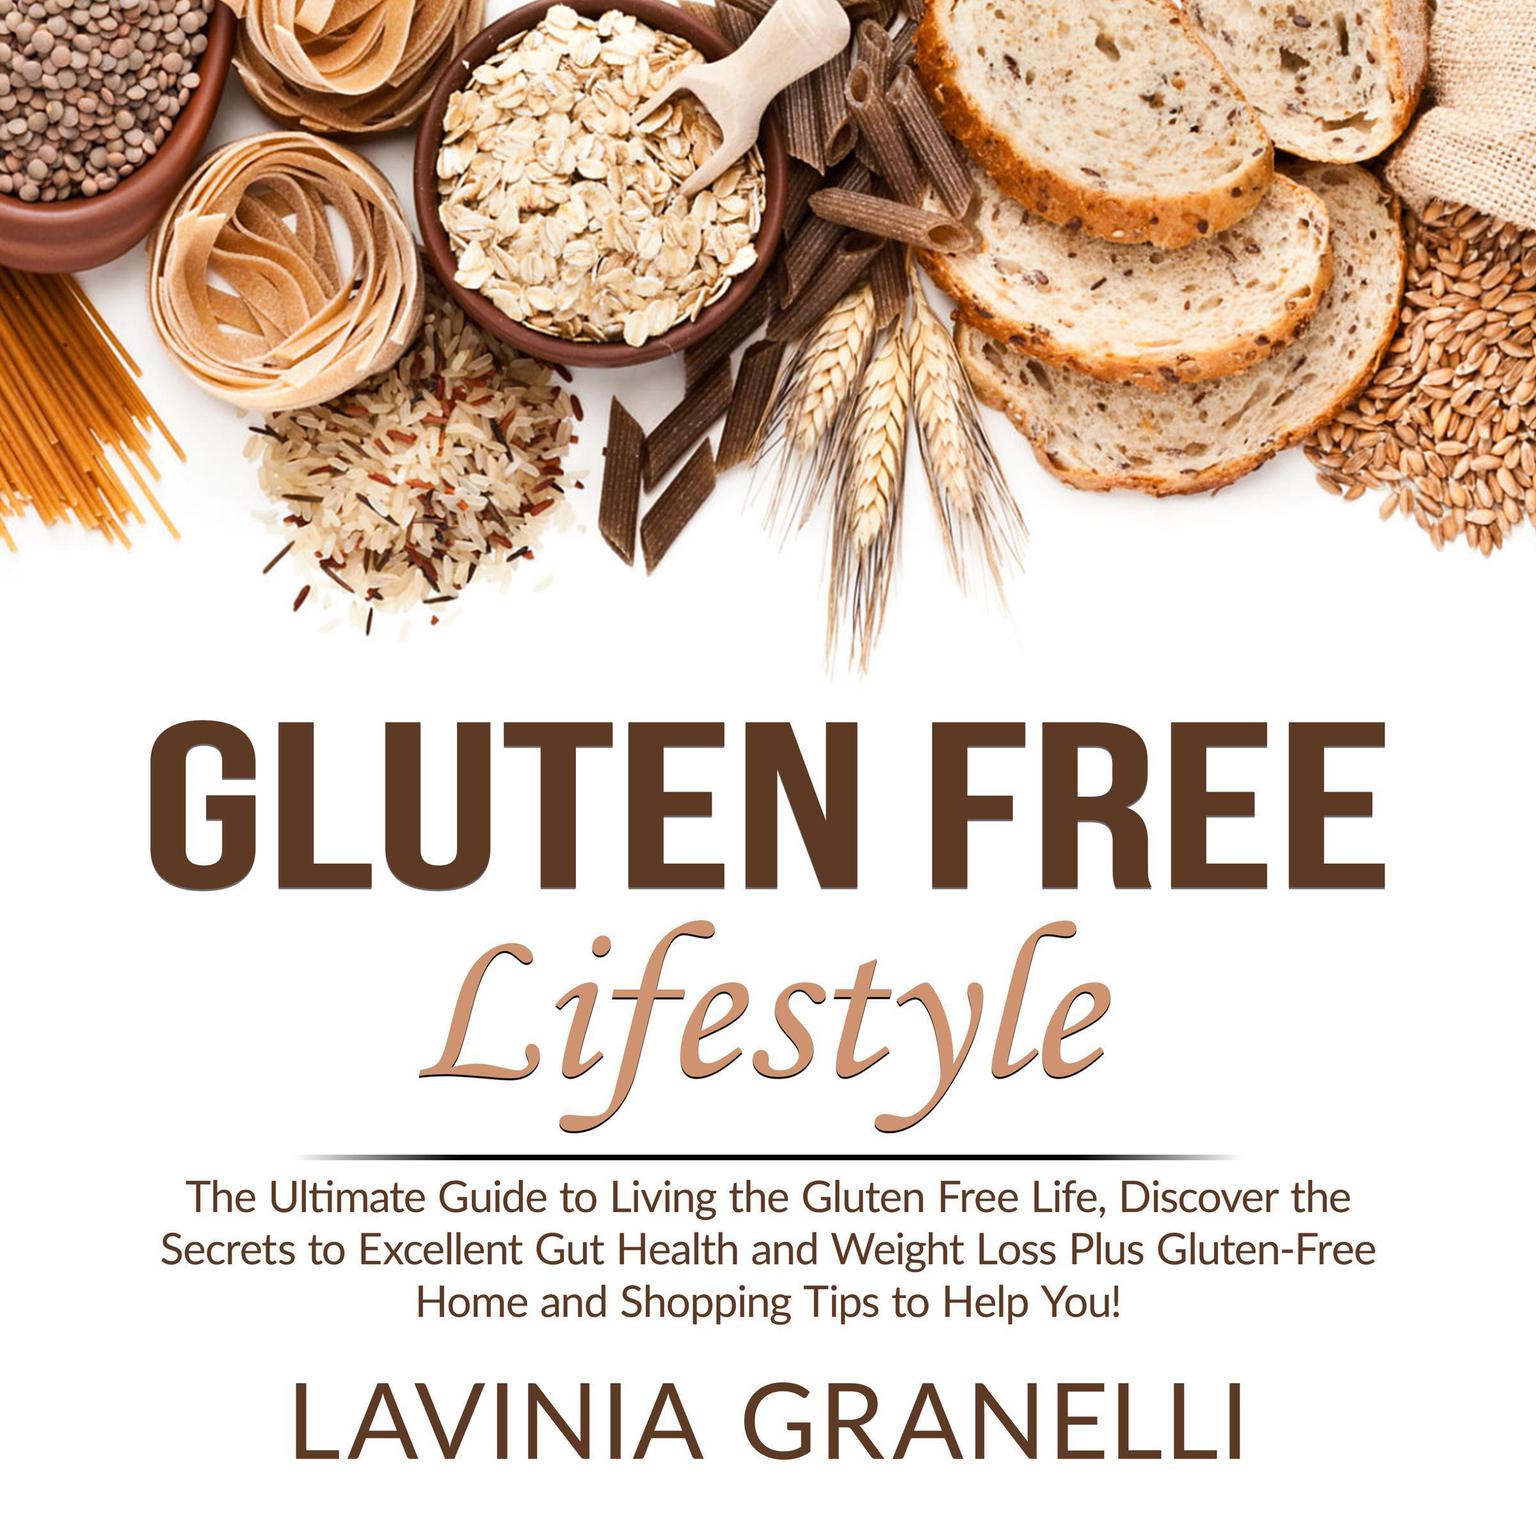 Gluten Free Lifestyle: The Ultimate Guide to Living the Gluten Free Life, Discover the Secrets to Excellent Gut Health and Weight Loss Plus Gluten-Free Home and Shopping Tips to Help You! Audiobook, by Lavinia Granelli